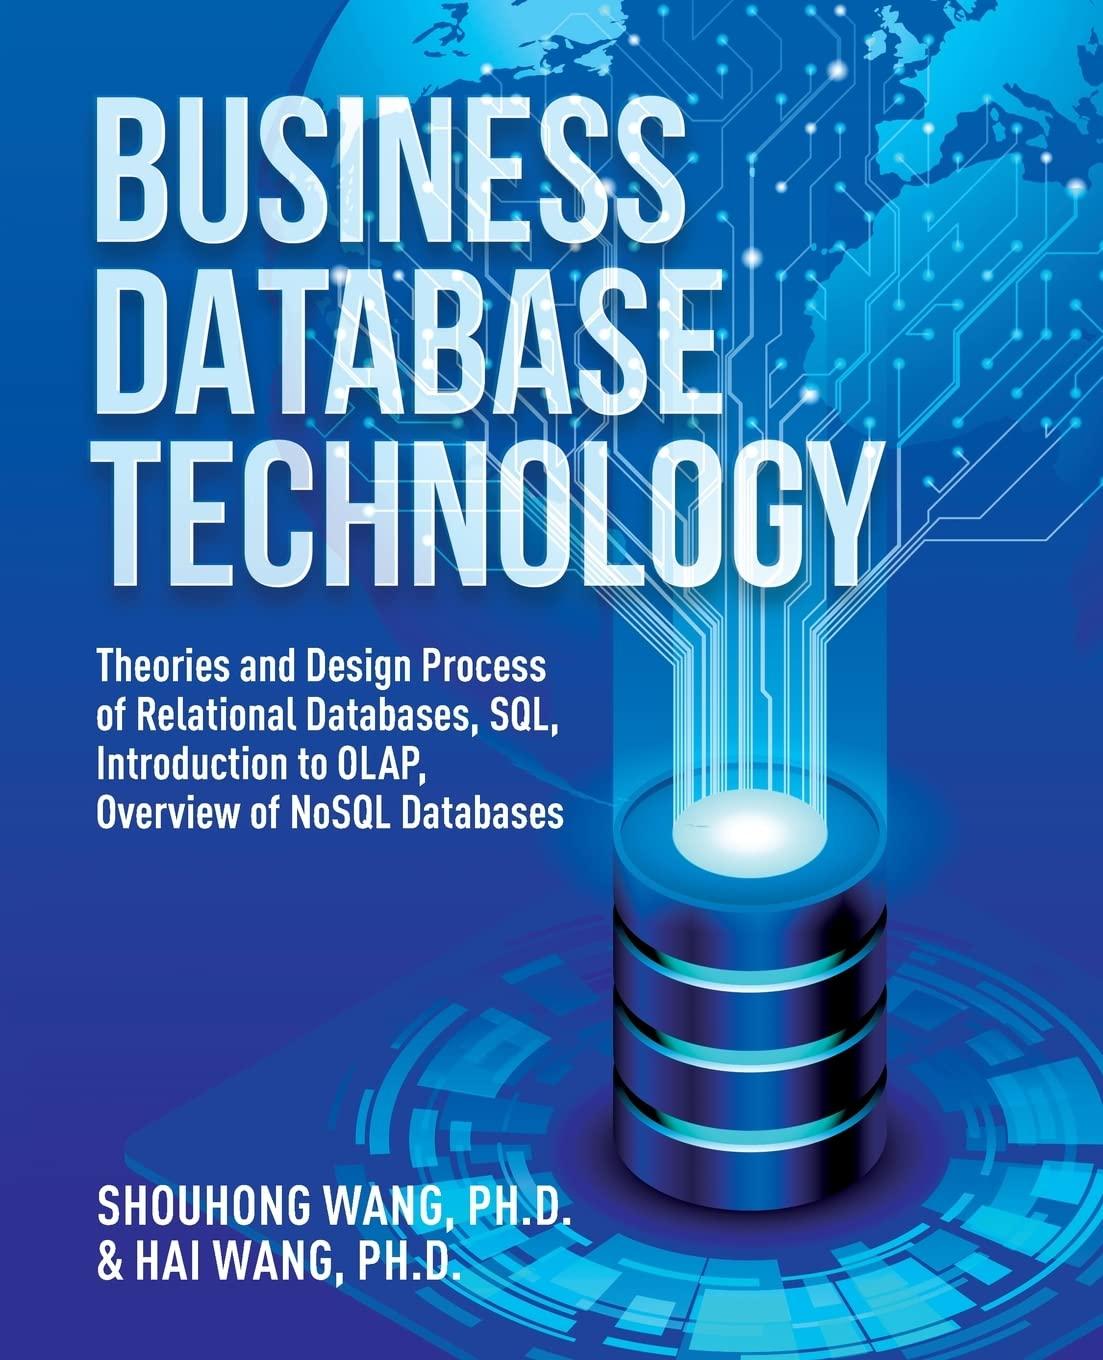 business database technology theories and design process of relational databases sql introduction to olap